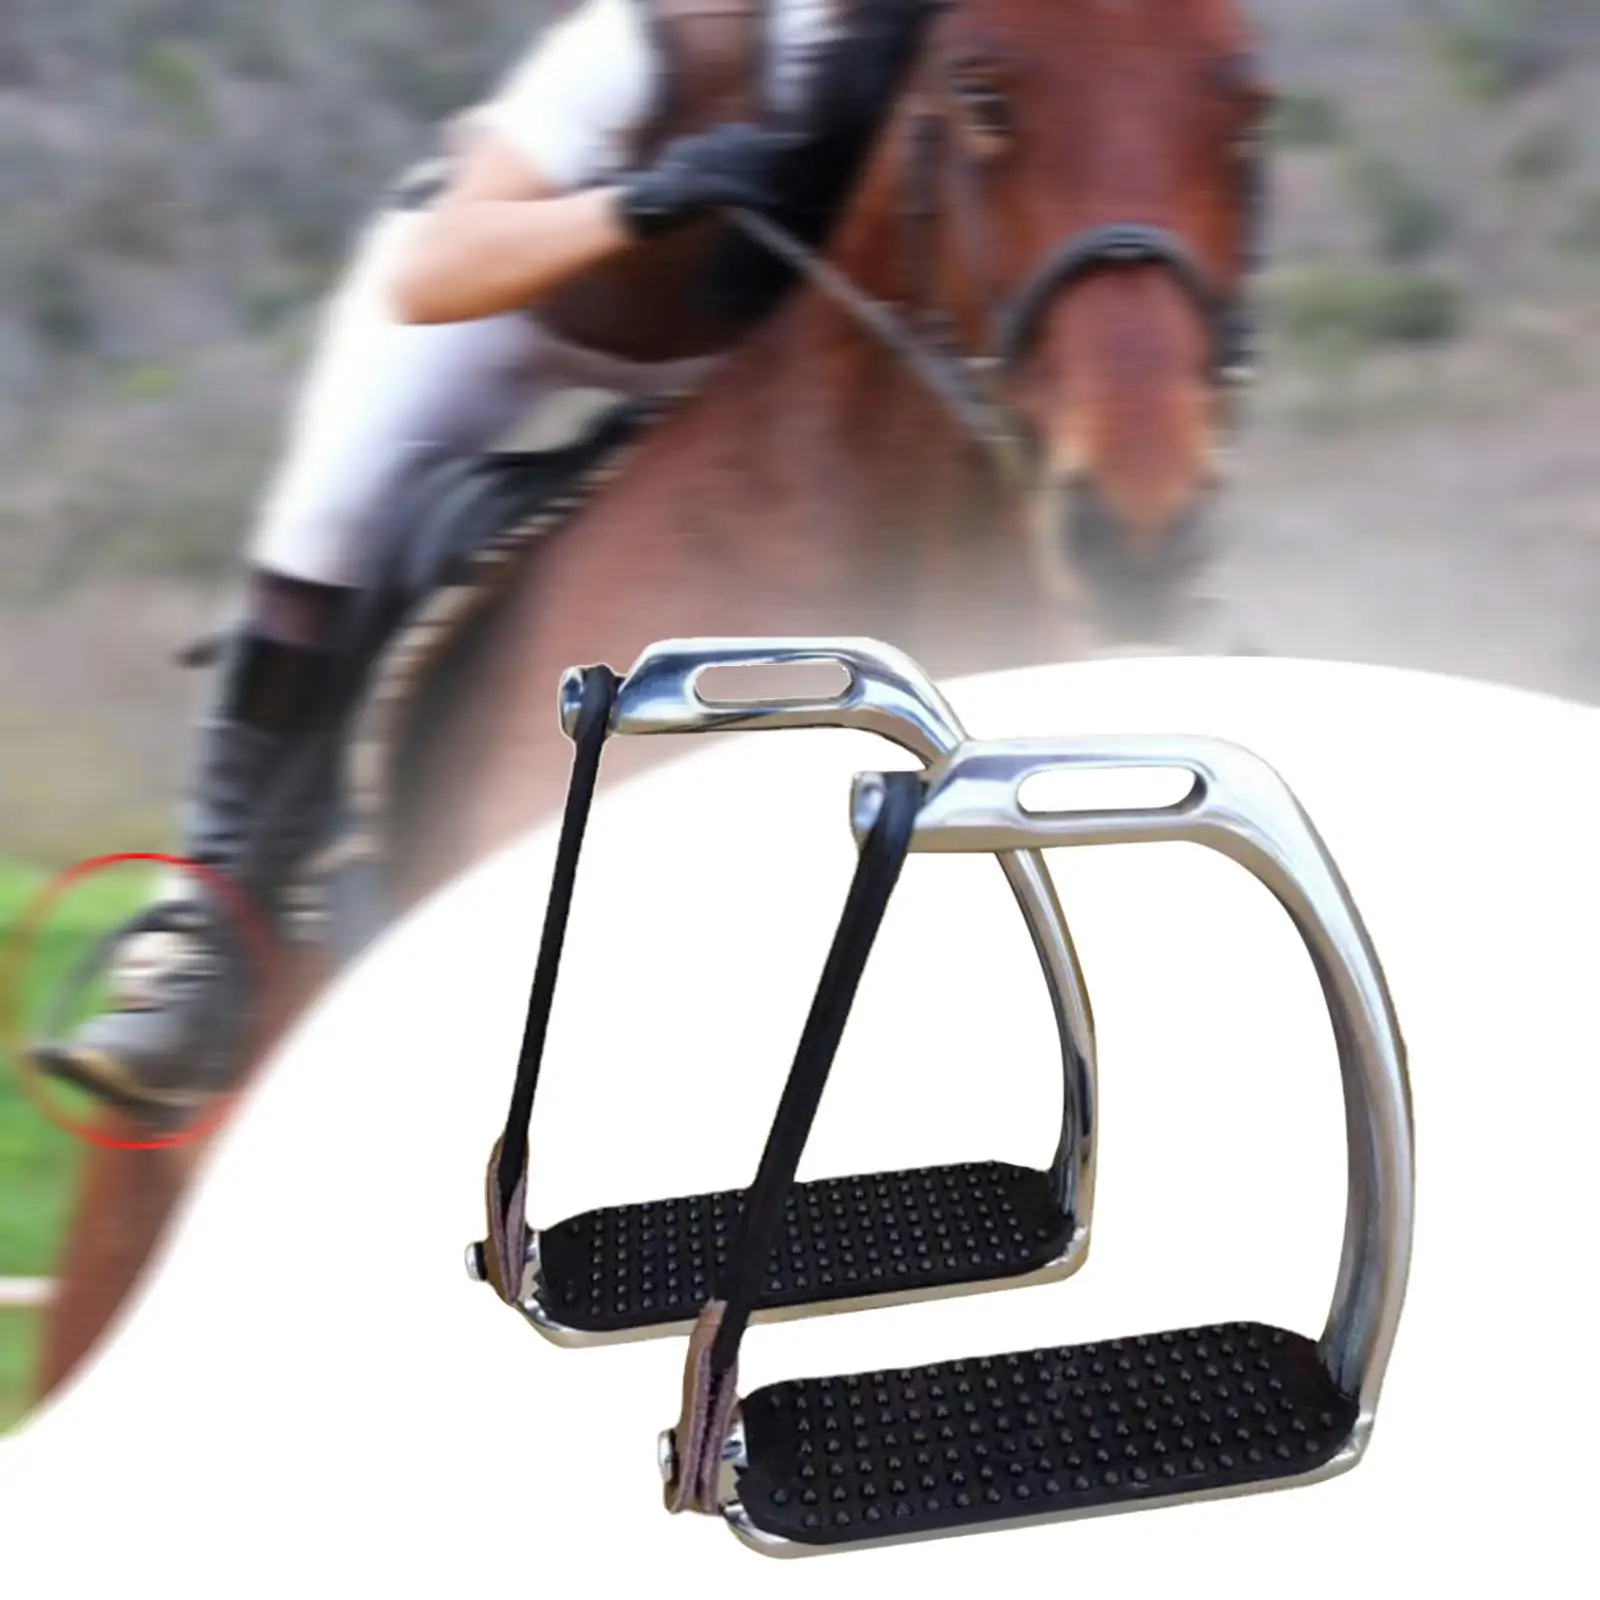 Horse Riding Stirrup Tools 2 Pieces Equestrian Sports Adults